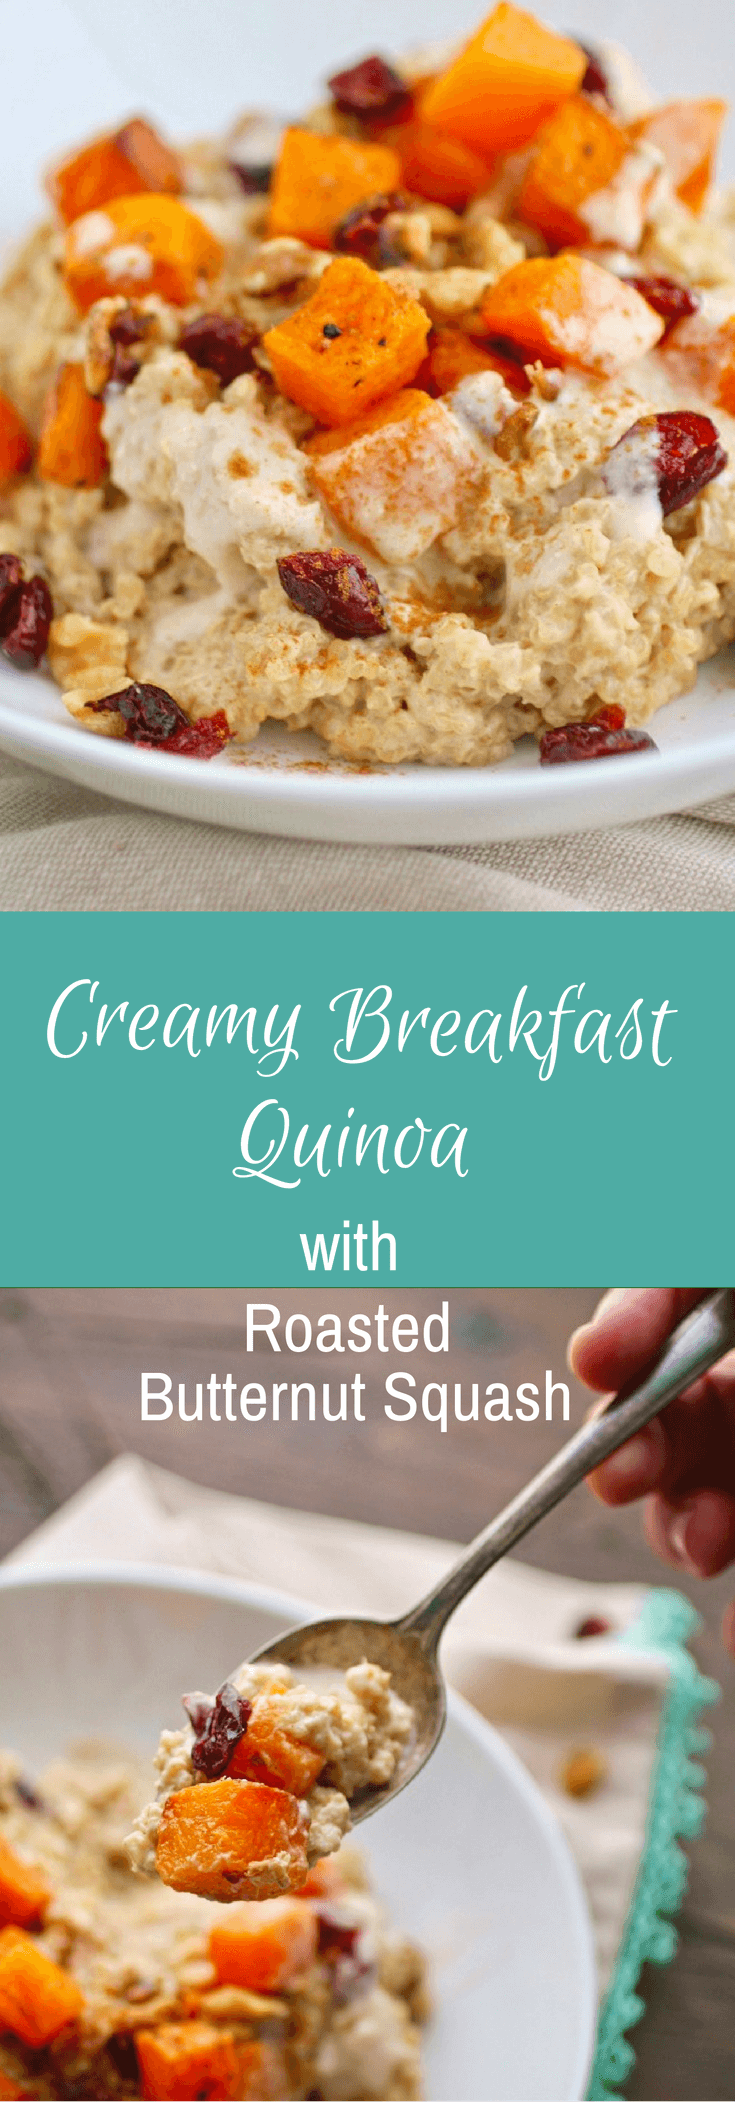 For an amazing meal in the a.m., try Creamy Breakfast Quinoa with Roasted Butternut Squash.